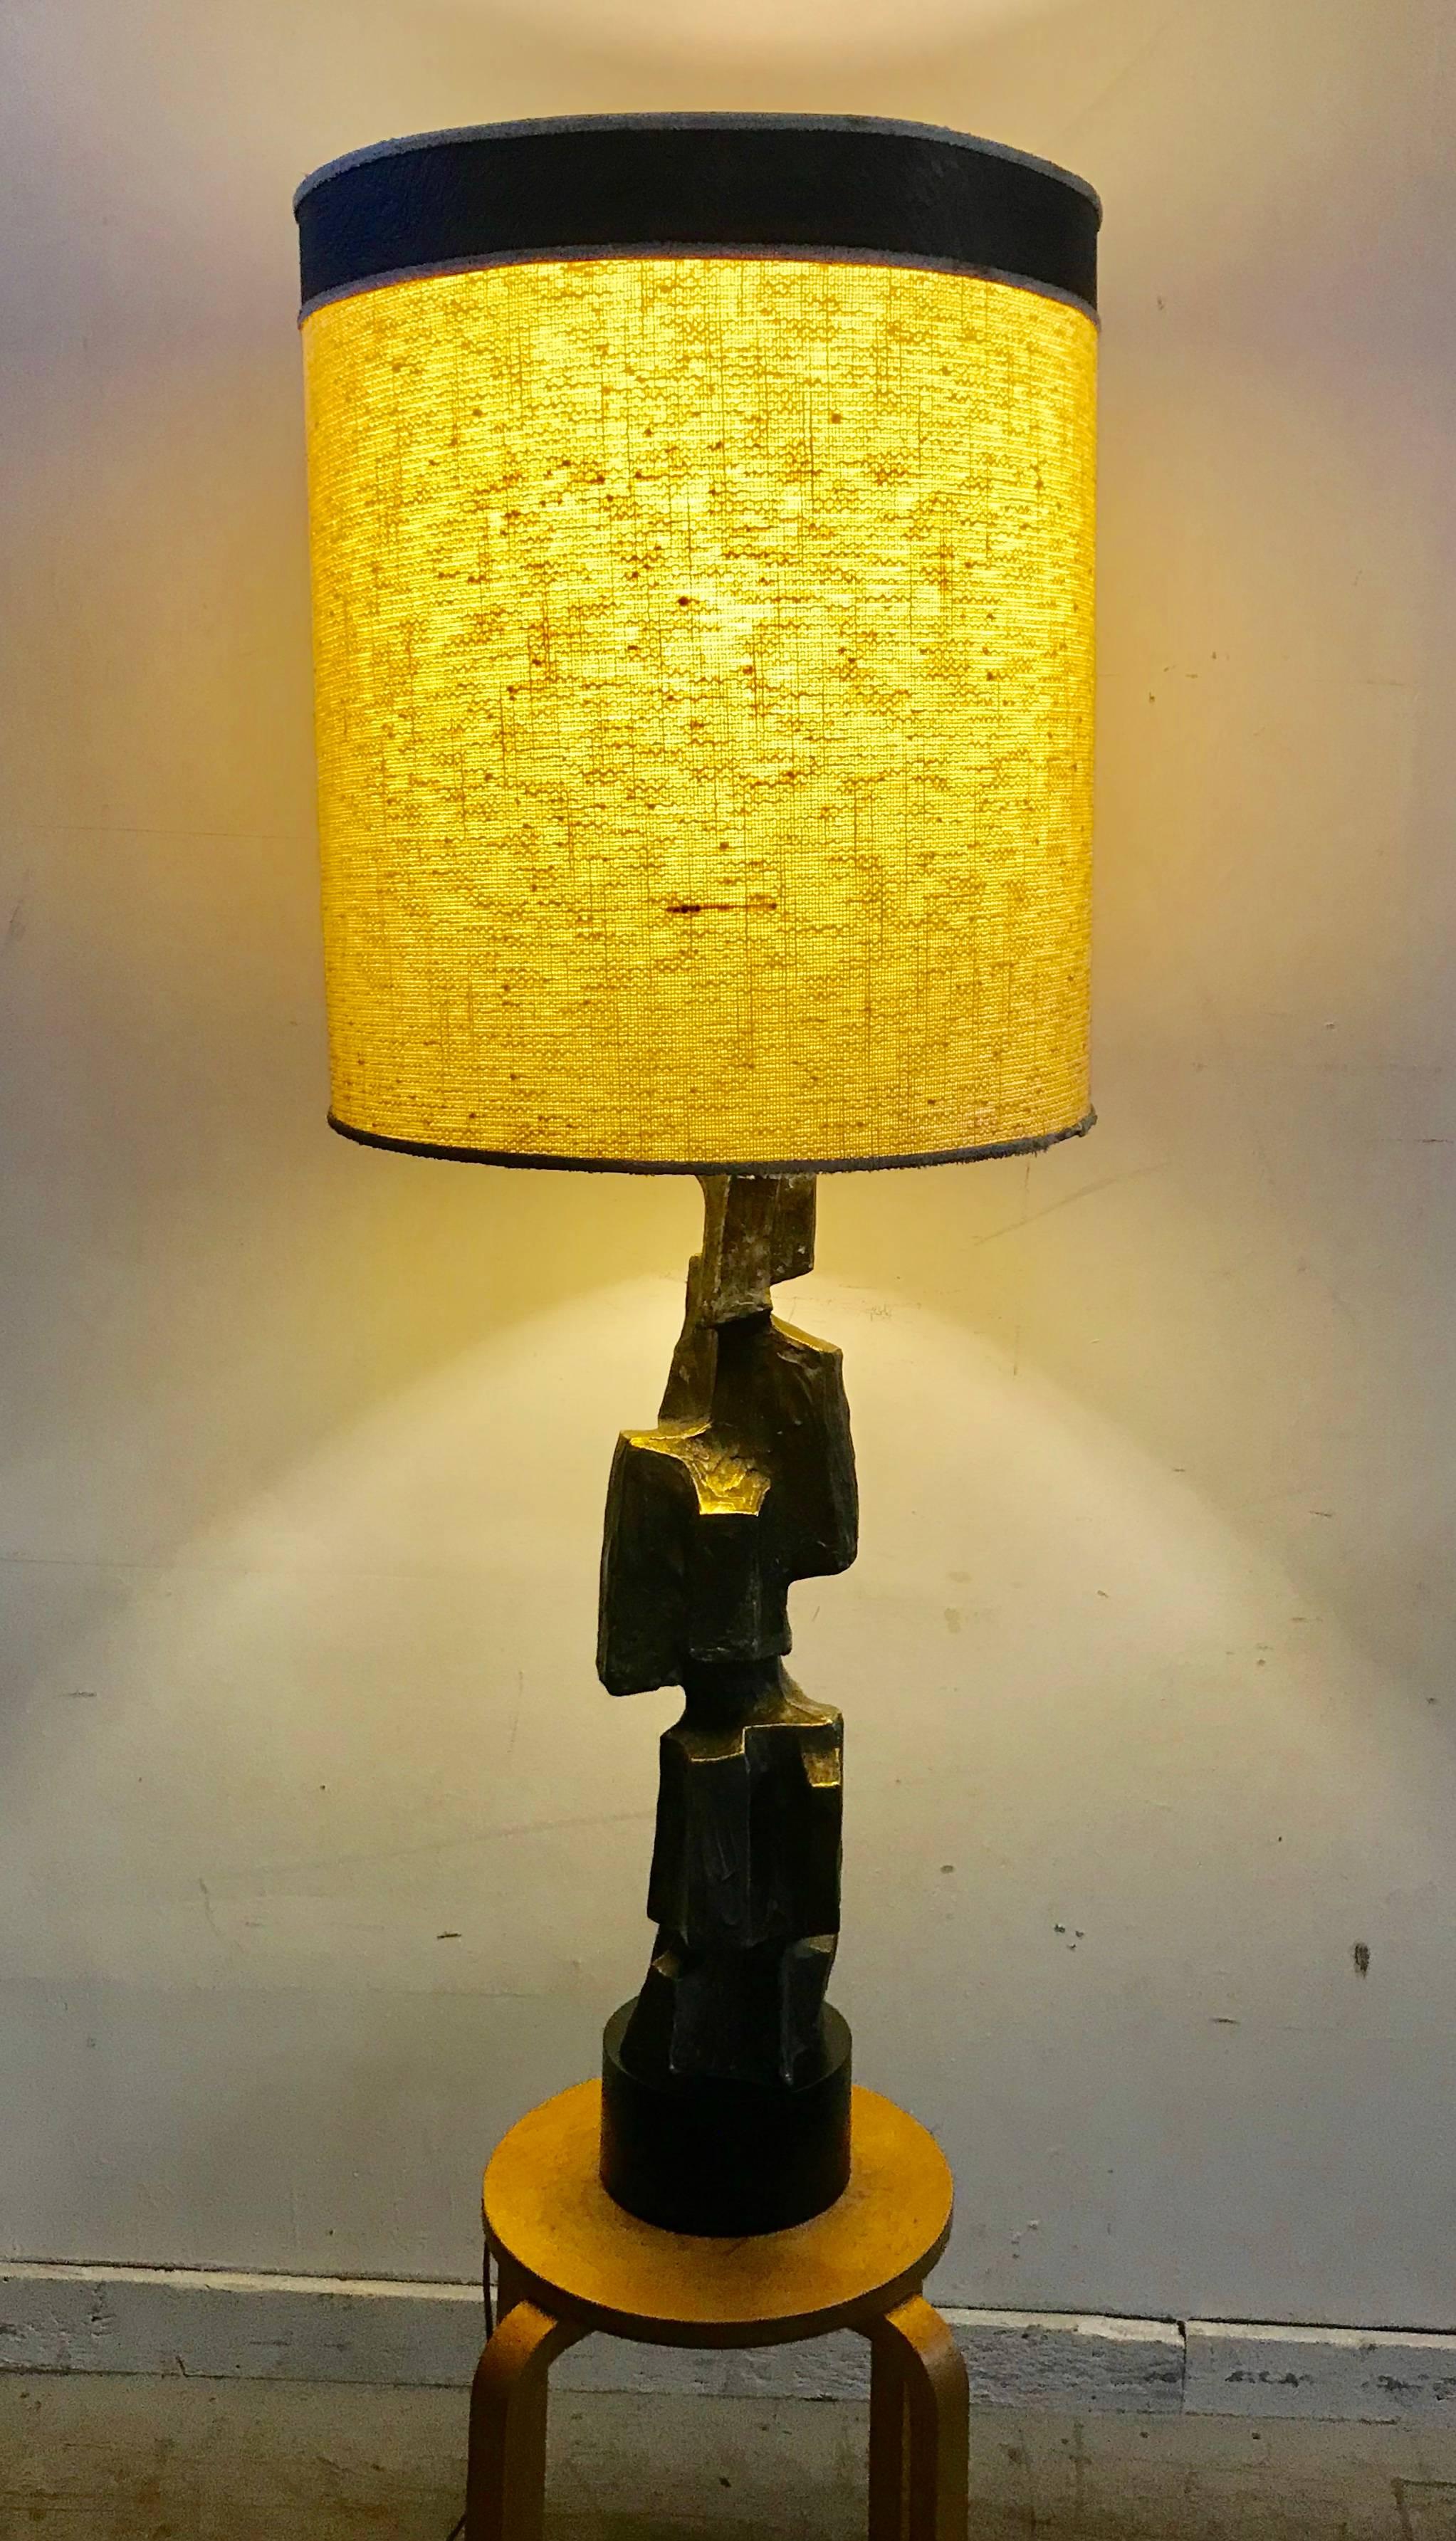 Sculptural bronze Brutalist table lamp, Maurizio Tempestini laurel, lamp base finished in bronze patina over textural cast metal body. Retains original lamp shade with bronze textured detail.